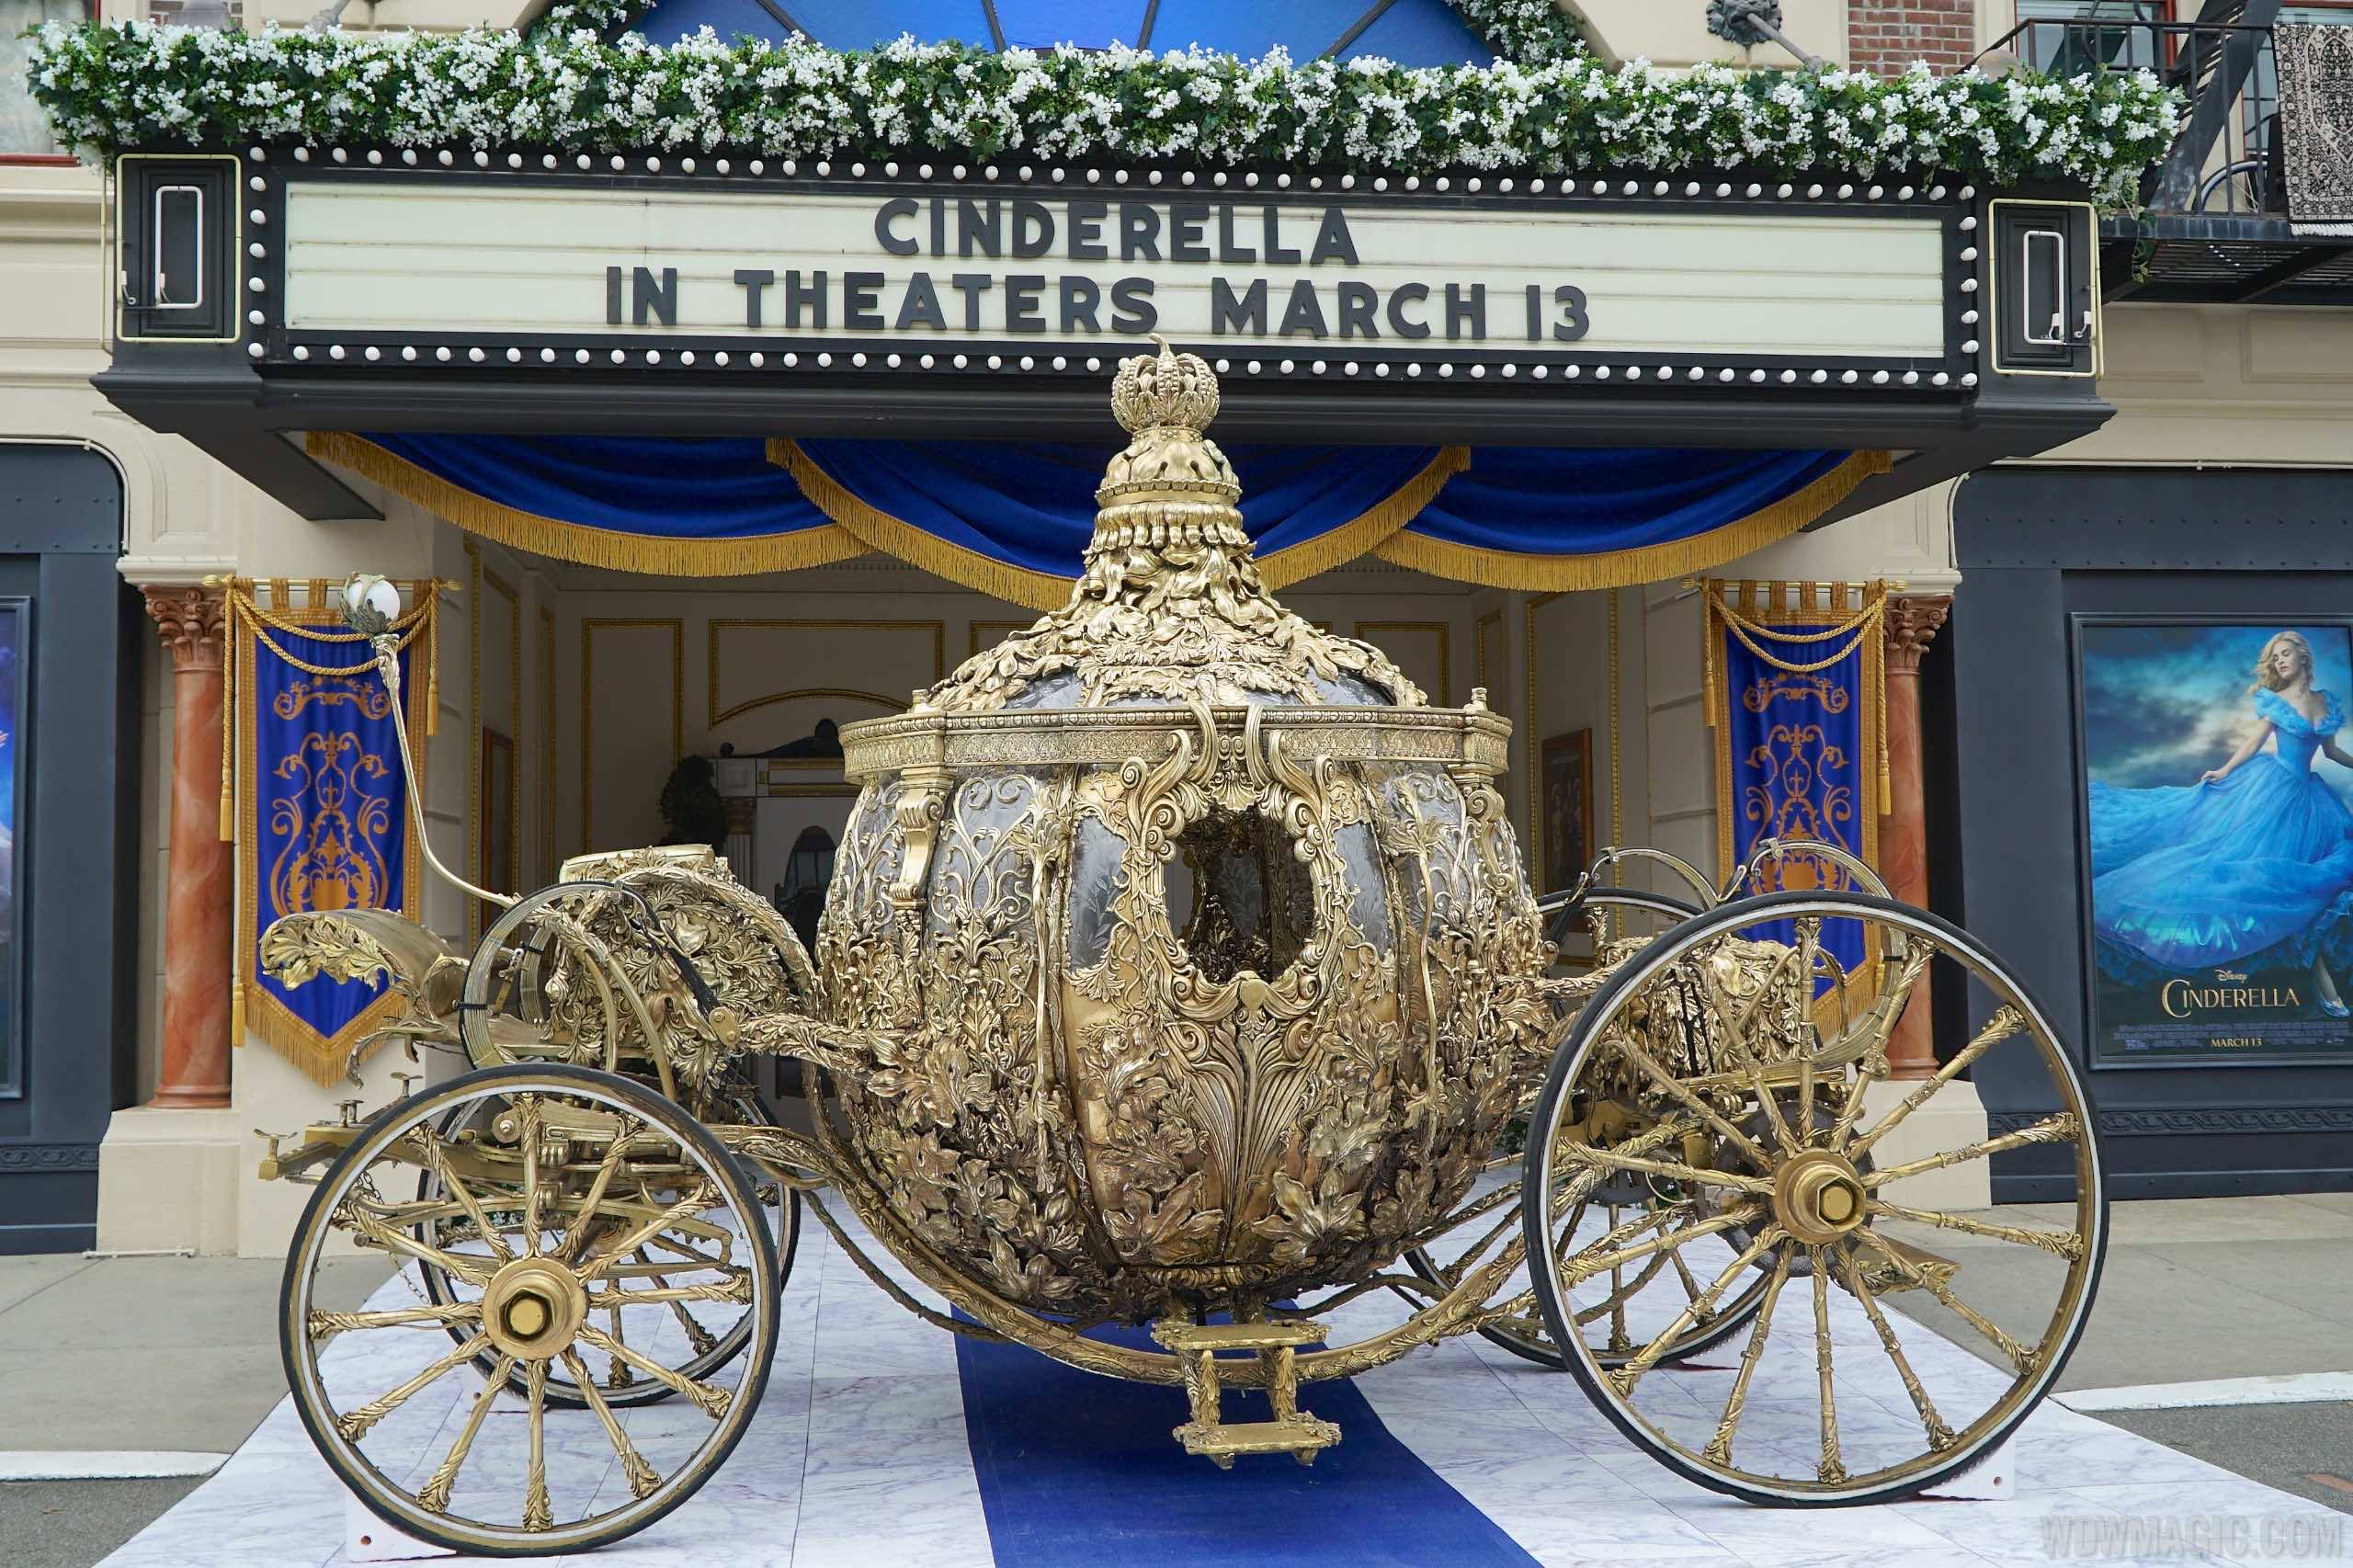 Golden Carriage prop from Cinderella